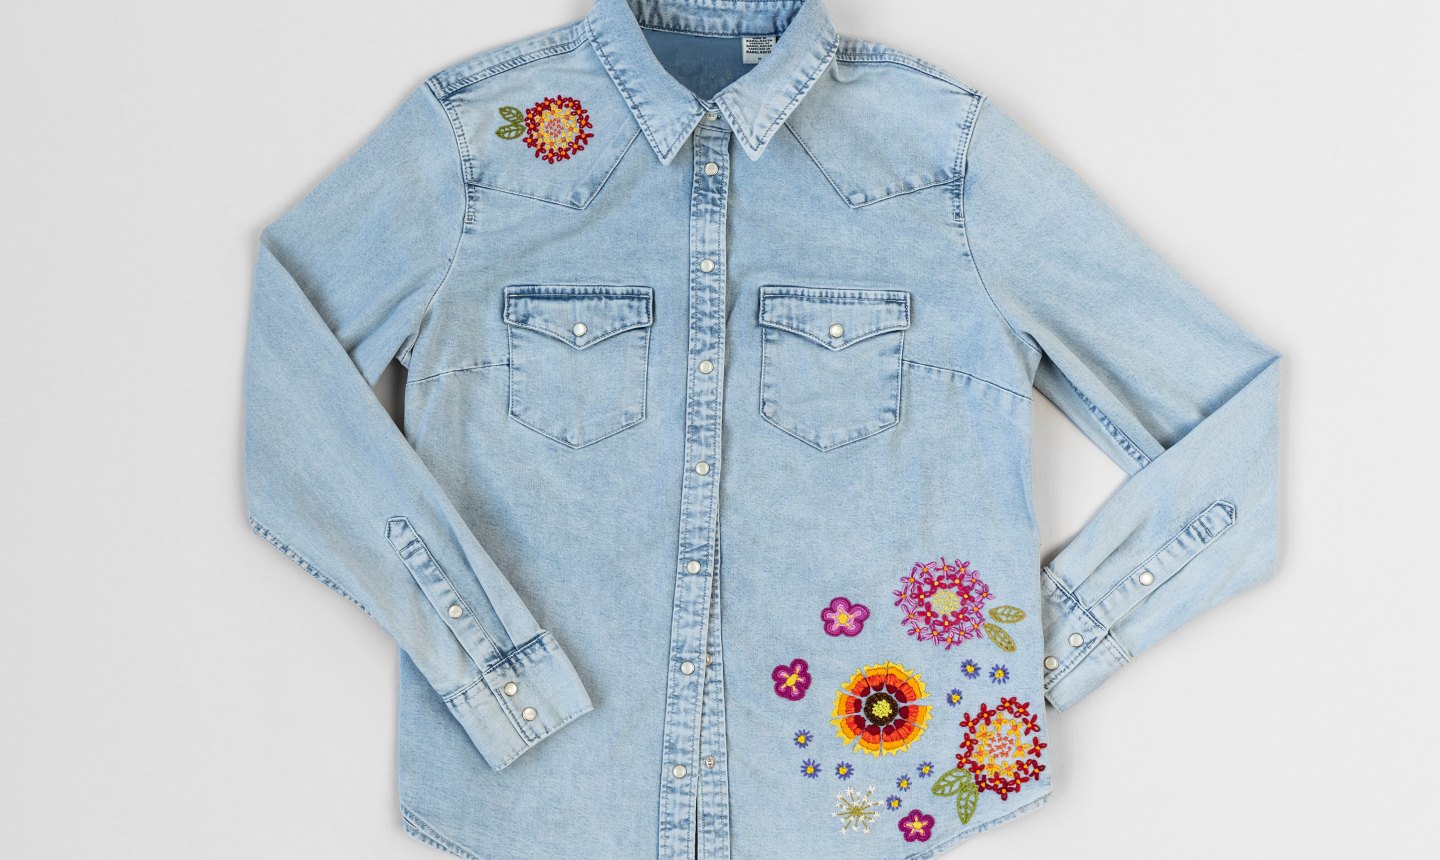 denim shirt with embroidered flowers